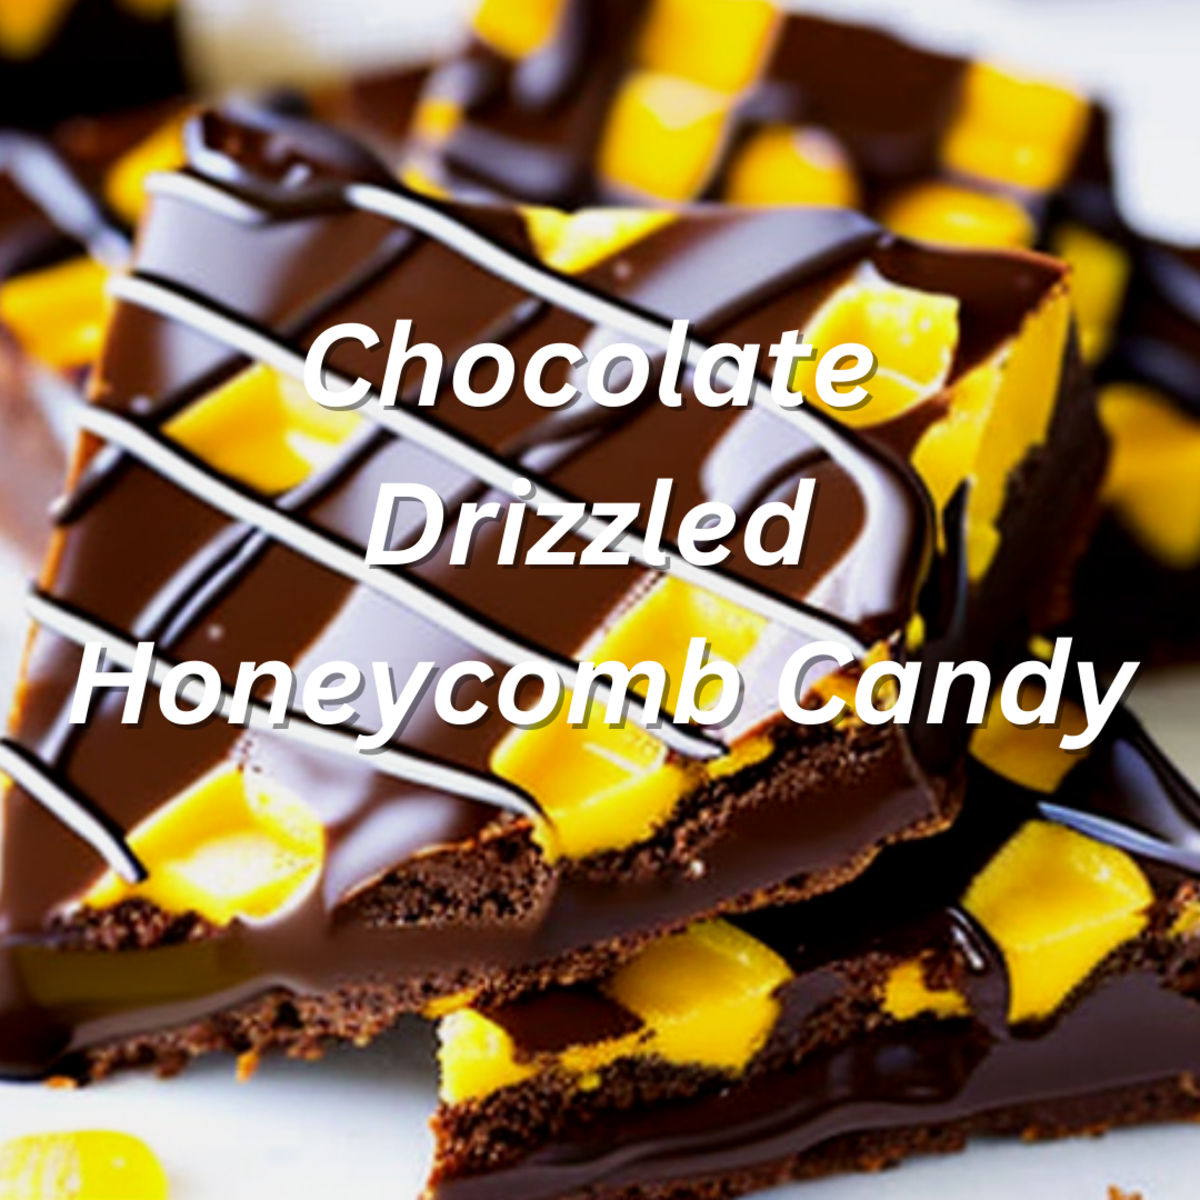 Chocolate Drizzled Honeycomb Candy